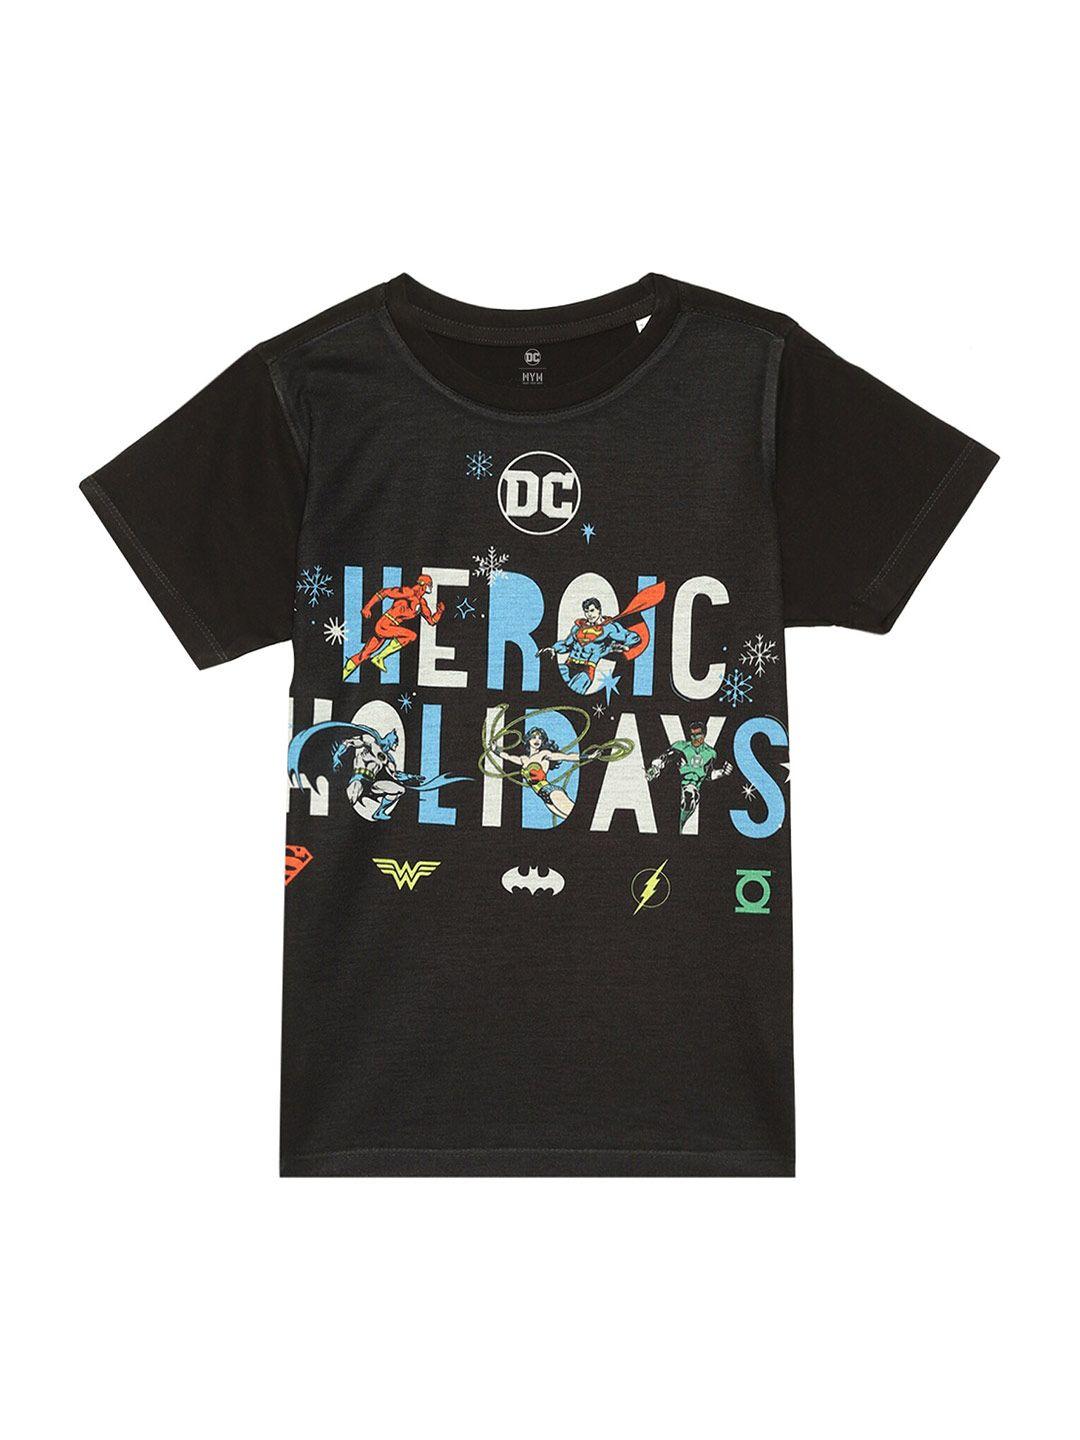 dc-by-wear-your-mind-boys-black-printed-t-shirt